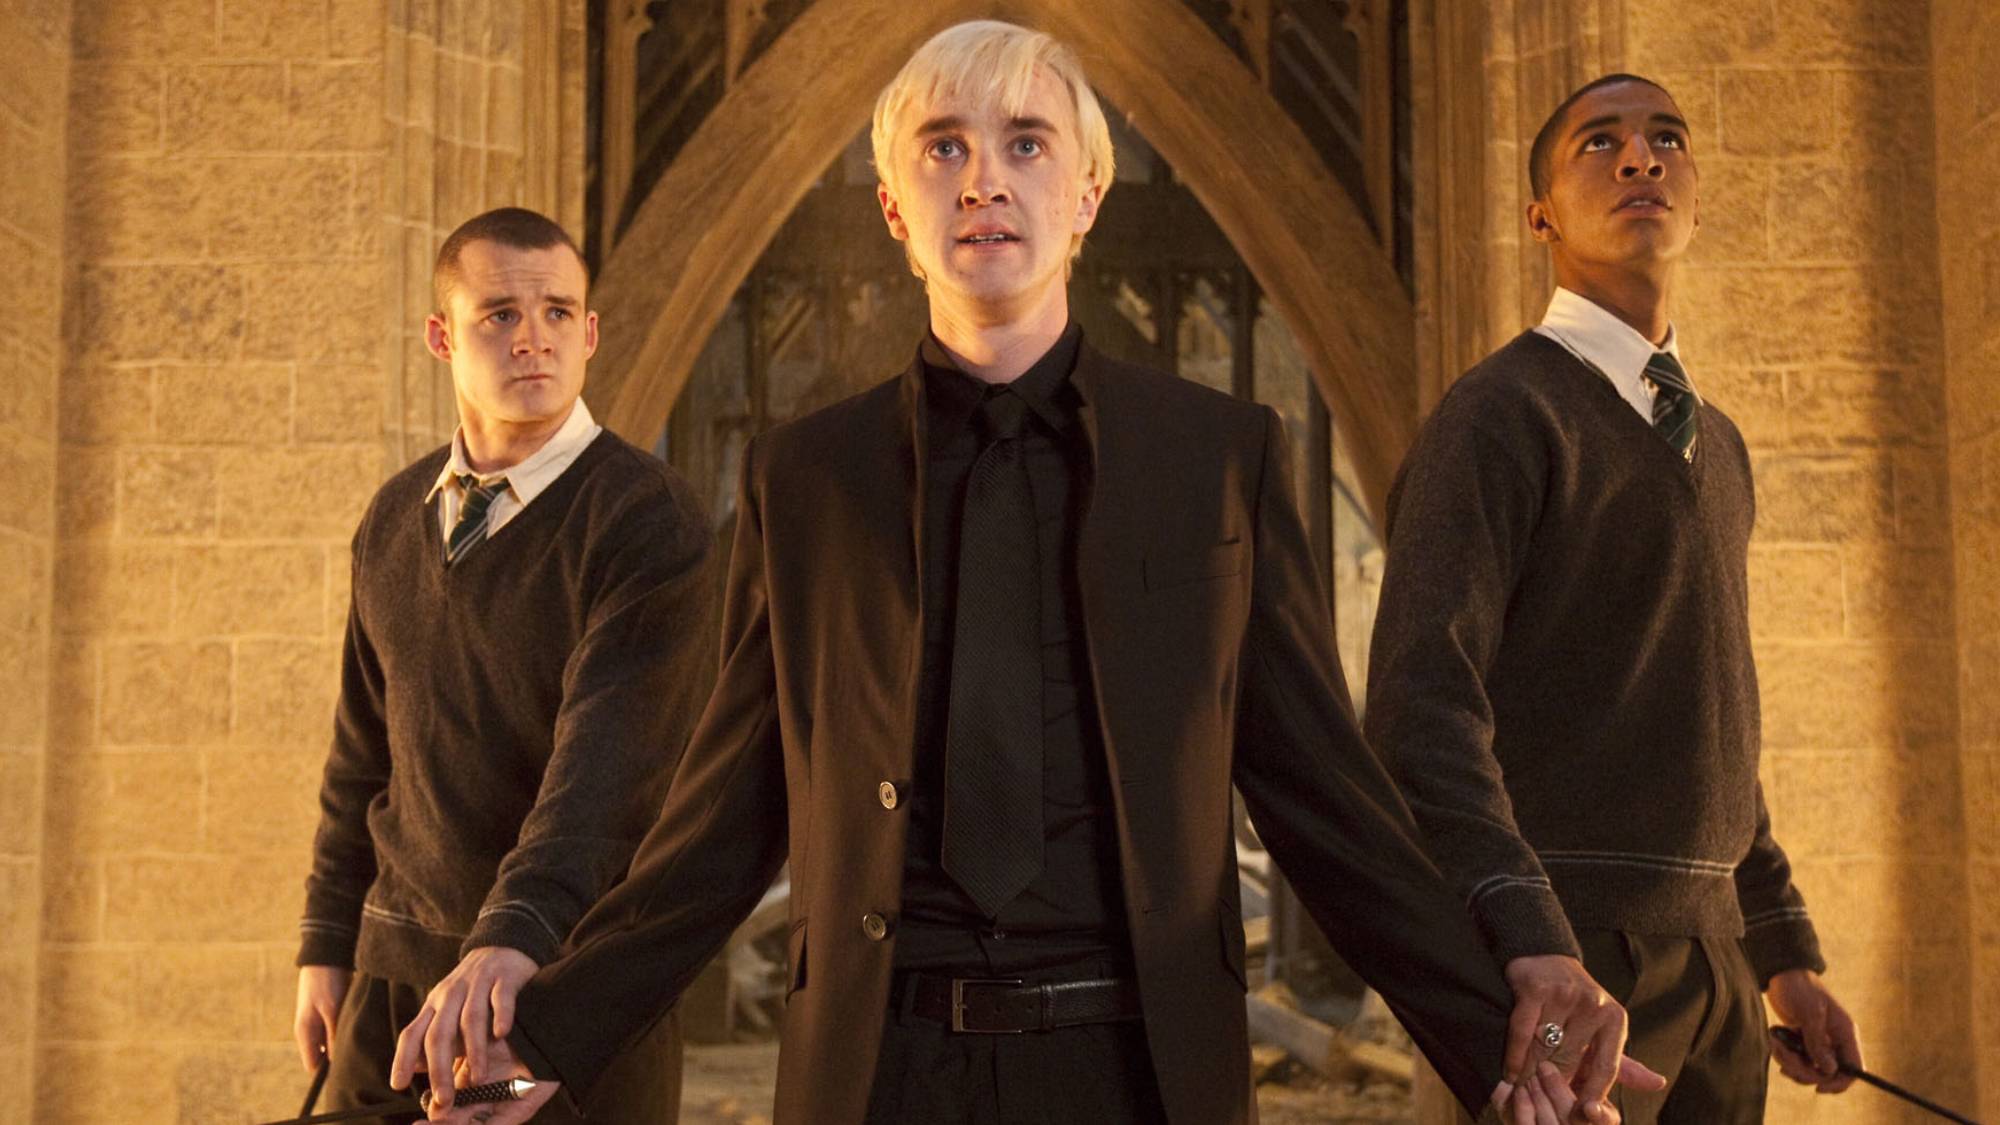 Three slytherin members ready for a fight